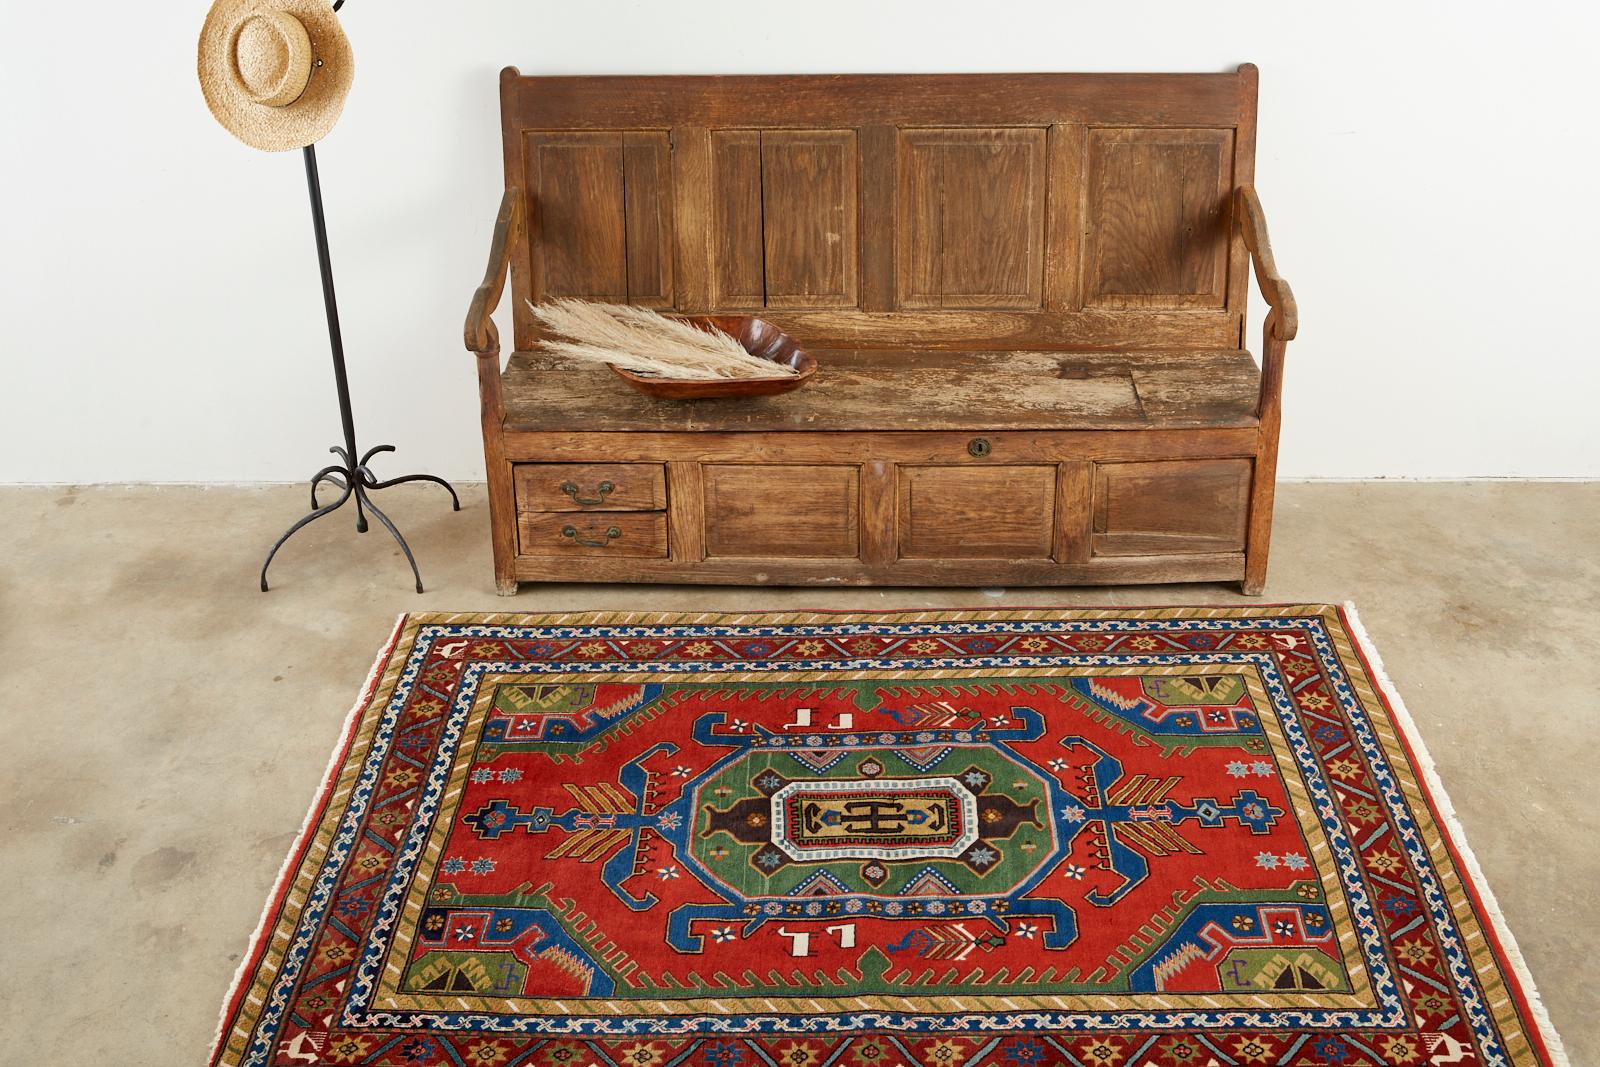 Fantastic Late 20th Century Modern semi-antique Persian Shiraz rug. Features a nomadic style typical of the Qashqai Tribe of weavers. Made with bold colors having a red field with a very rare dark green apple border. Decorated with white horse